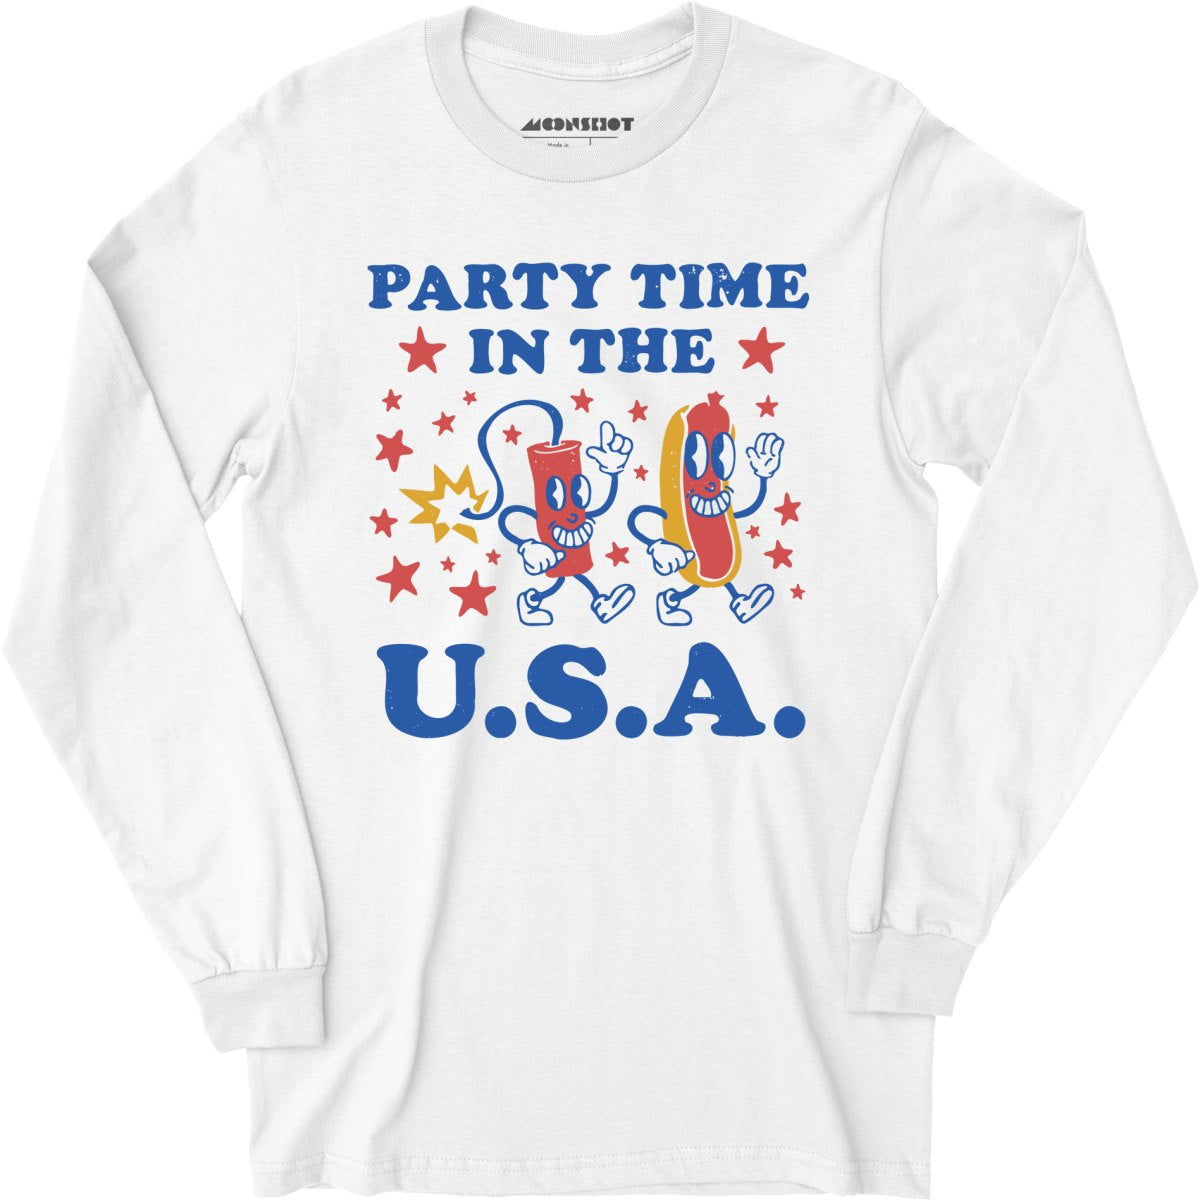 Party Time in The U.S.A. - Long Sleeve T-Shirt